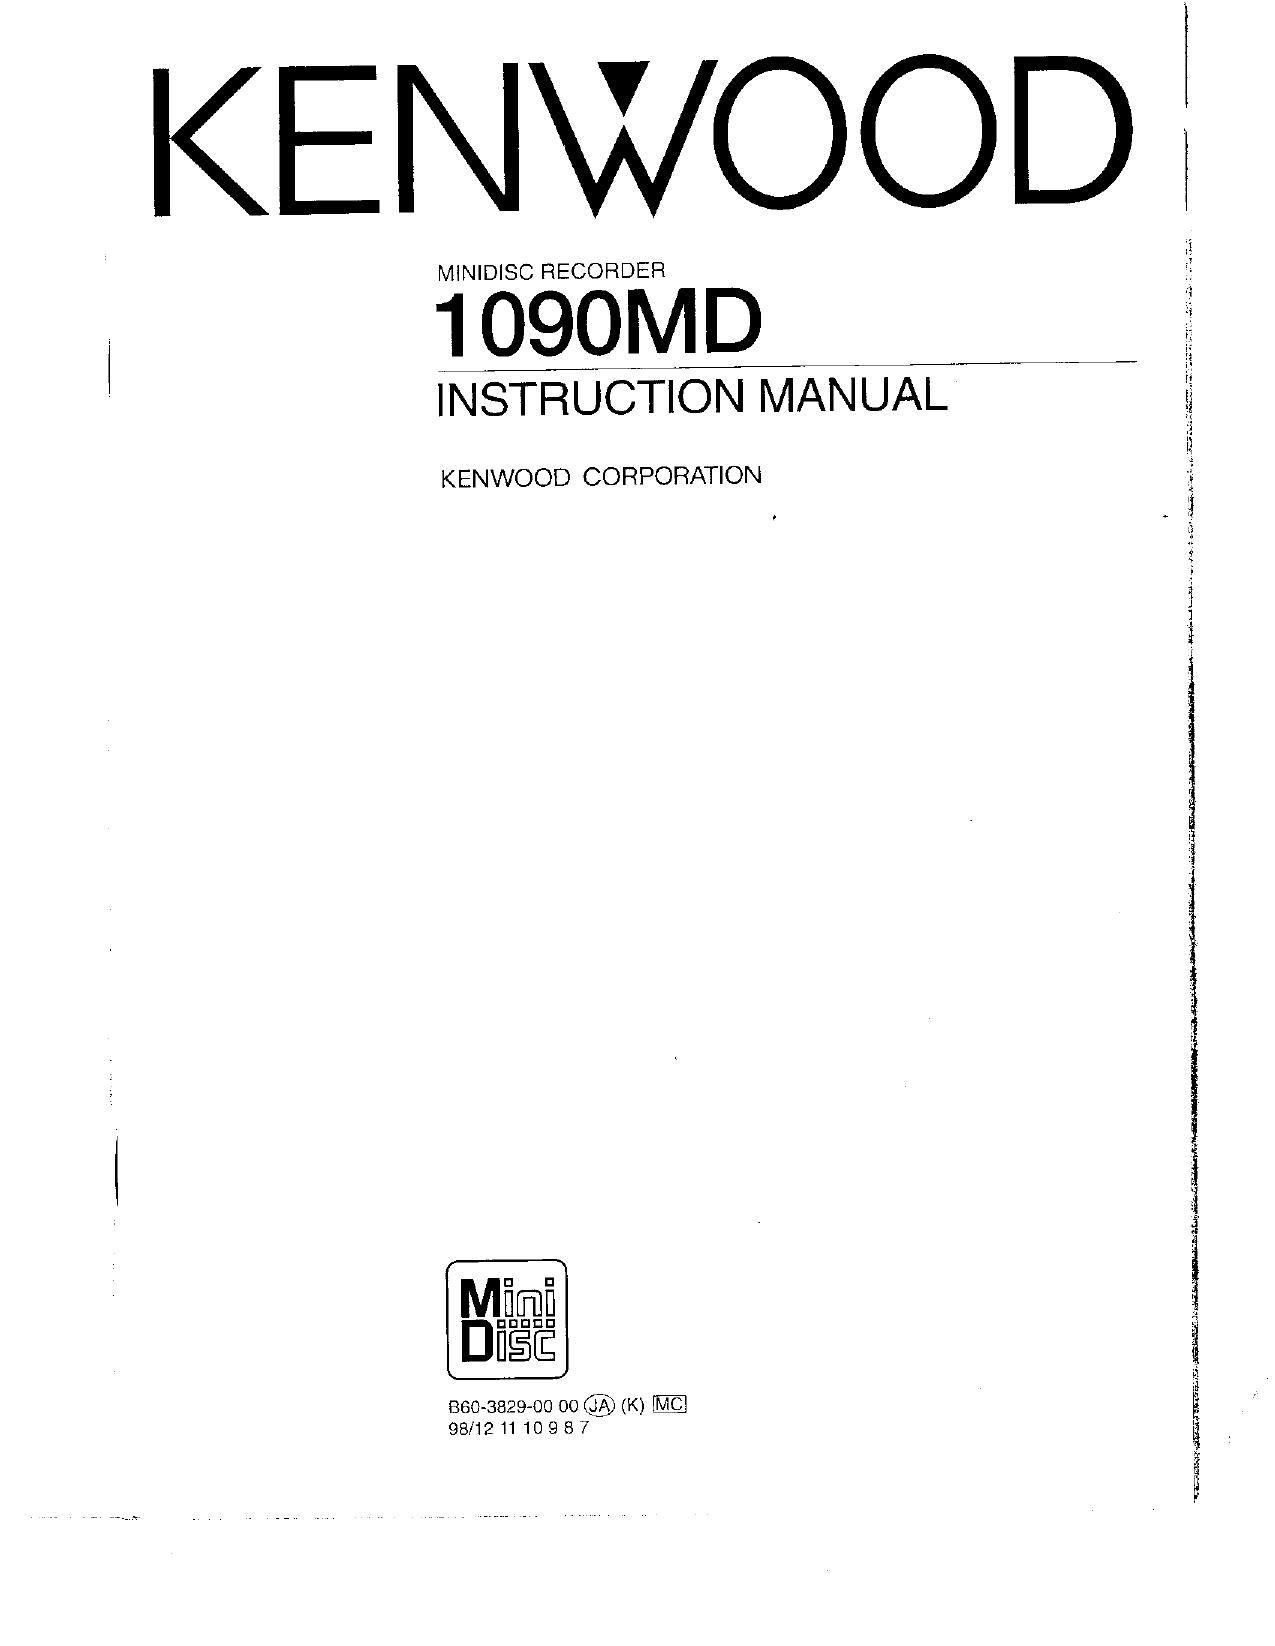 Kenwood 1090 MD Owners Manual